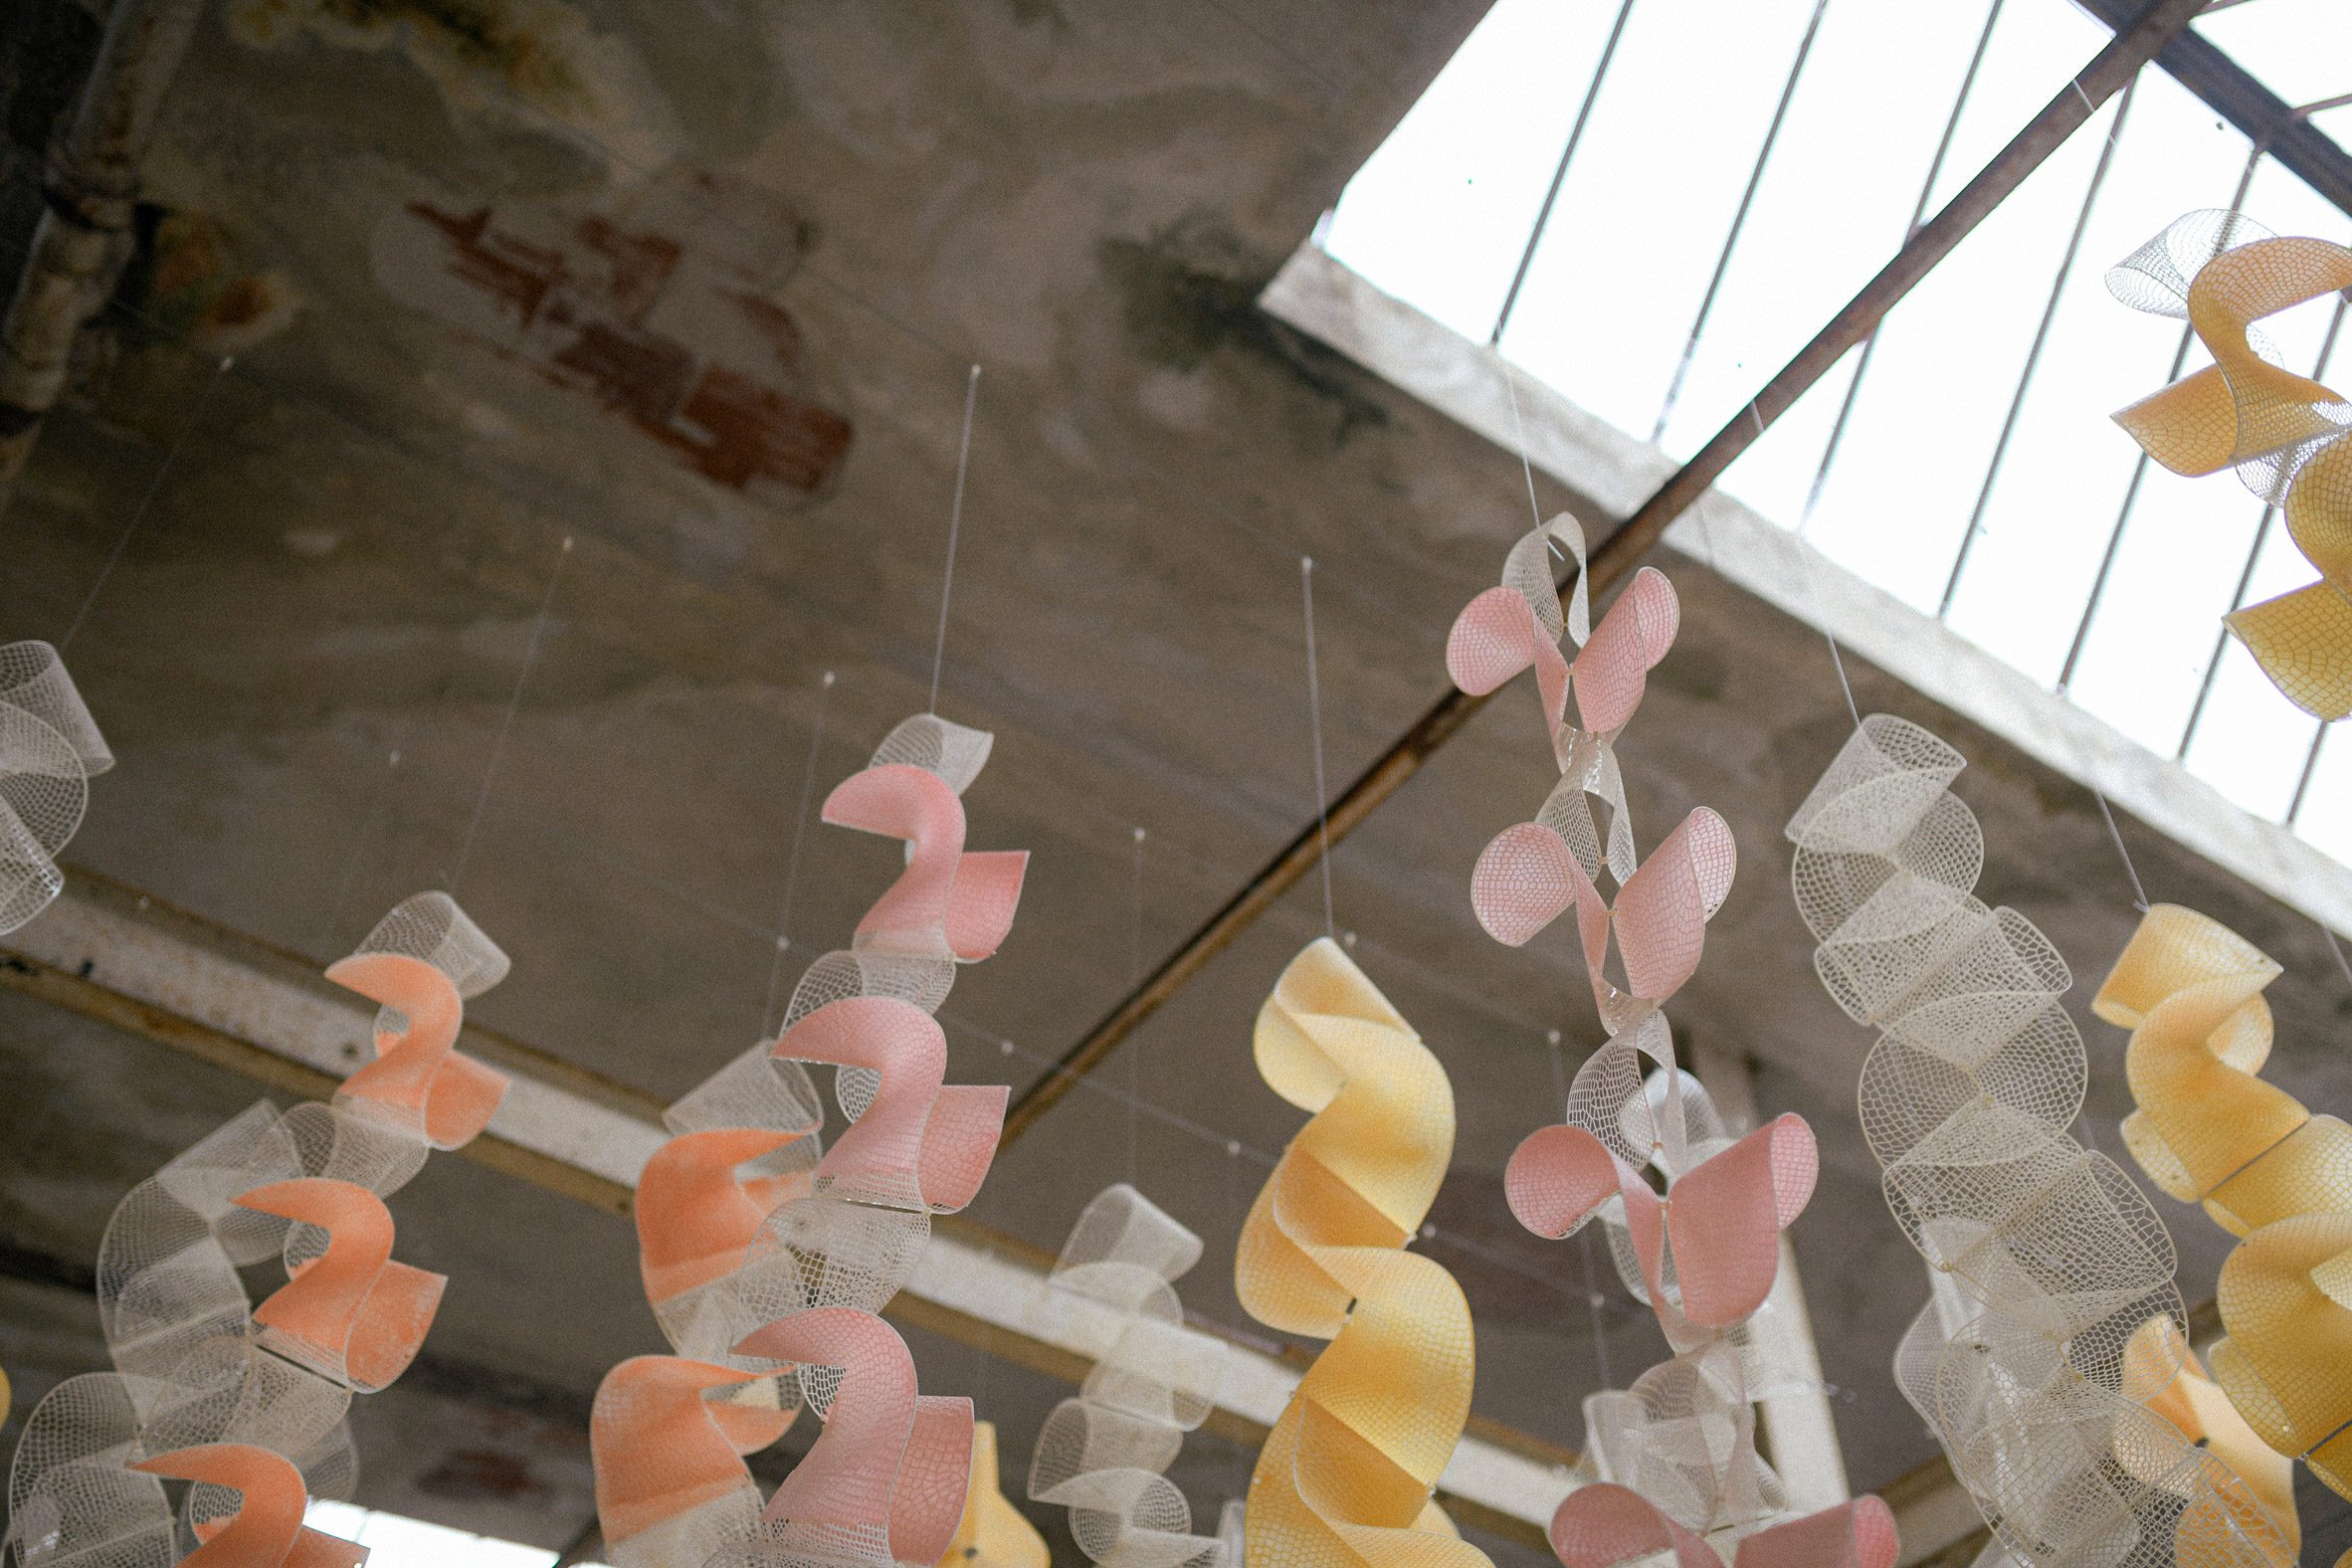 Photo of the tops of the ribbons making up the hanging Sensbiom 2 installation, where they attach to the ceiling